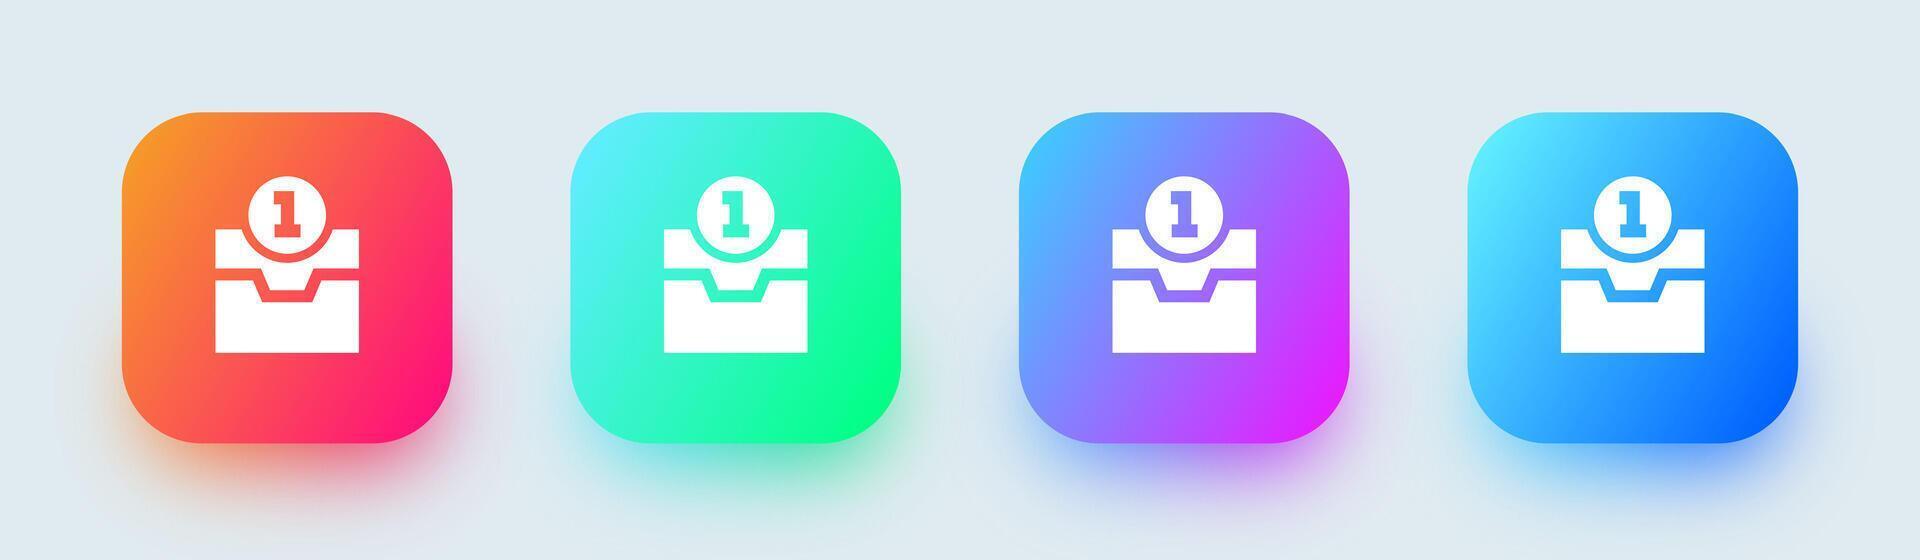 Direct message solid icon in square gradient colors. Inbox signs vector illustration.